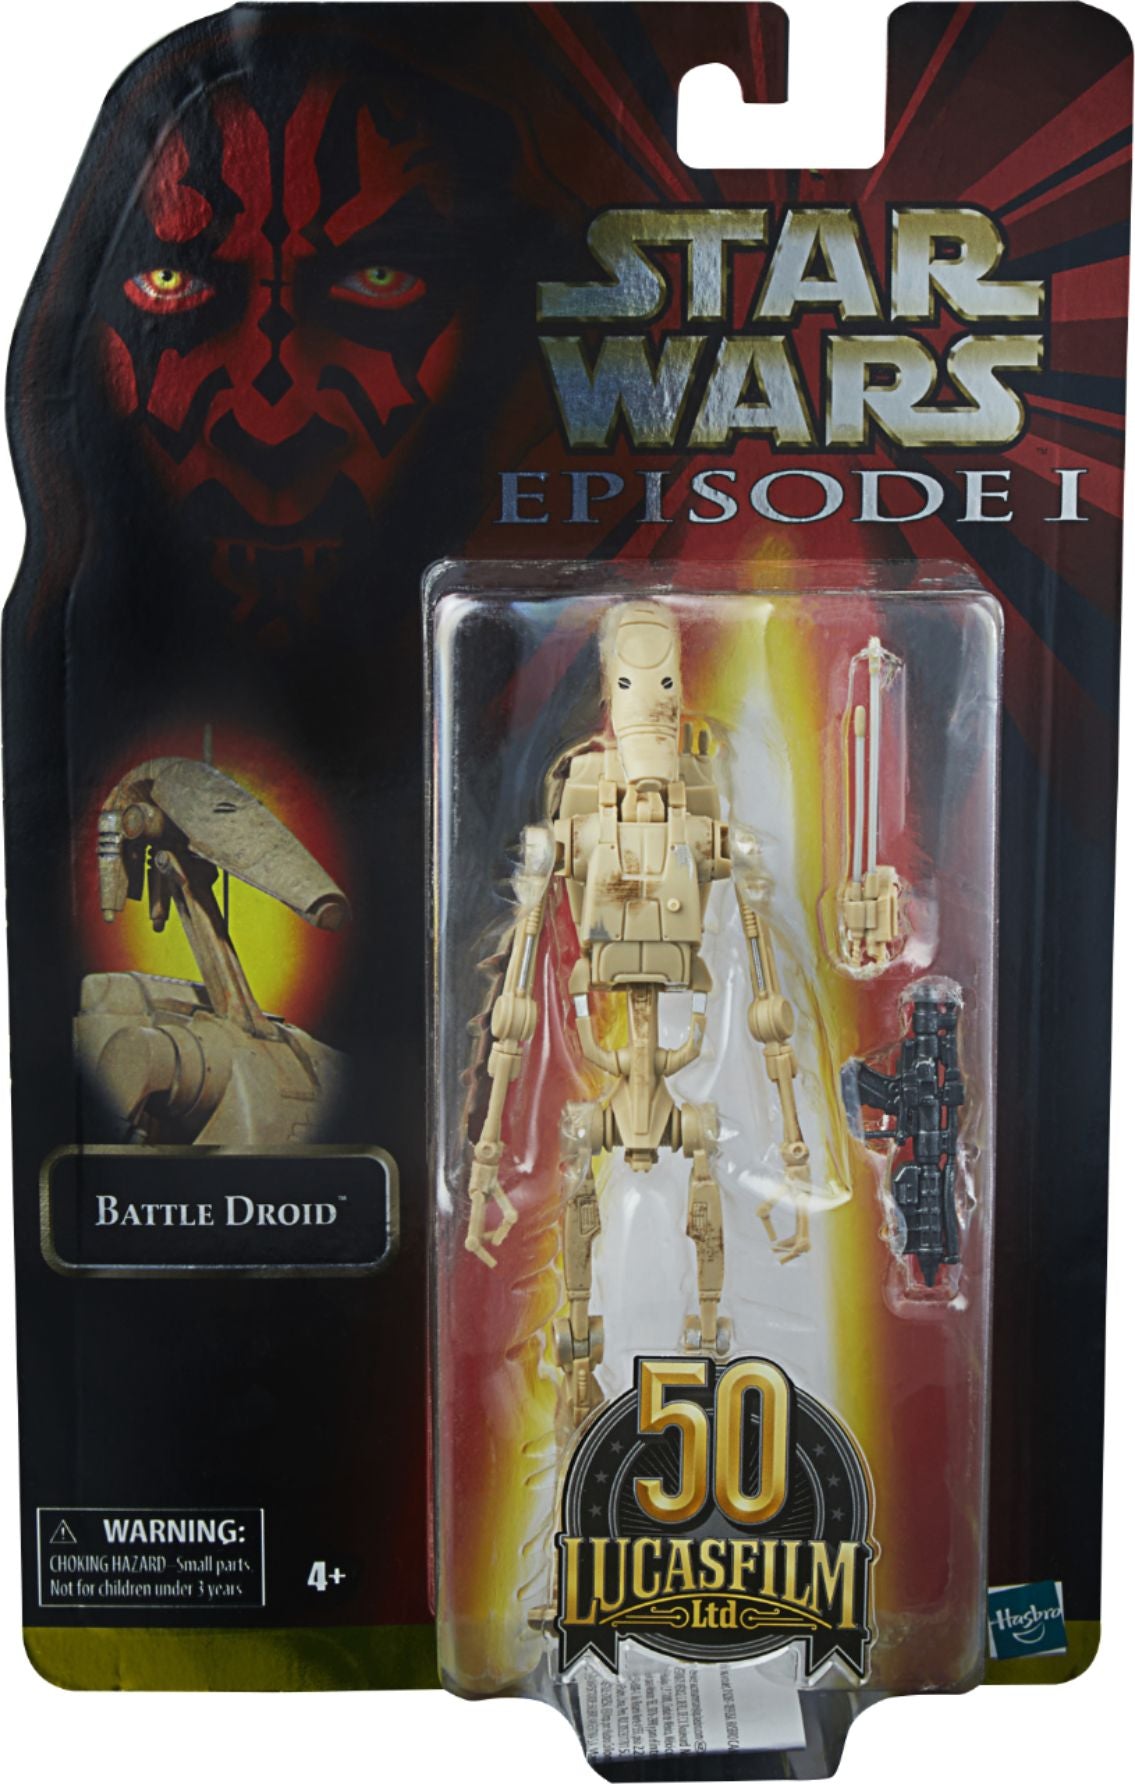 Hasbro Star Wars Black Series 50th Anniversary Episode I Battle Droid 6 Inch Action Figure